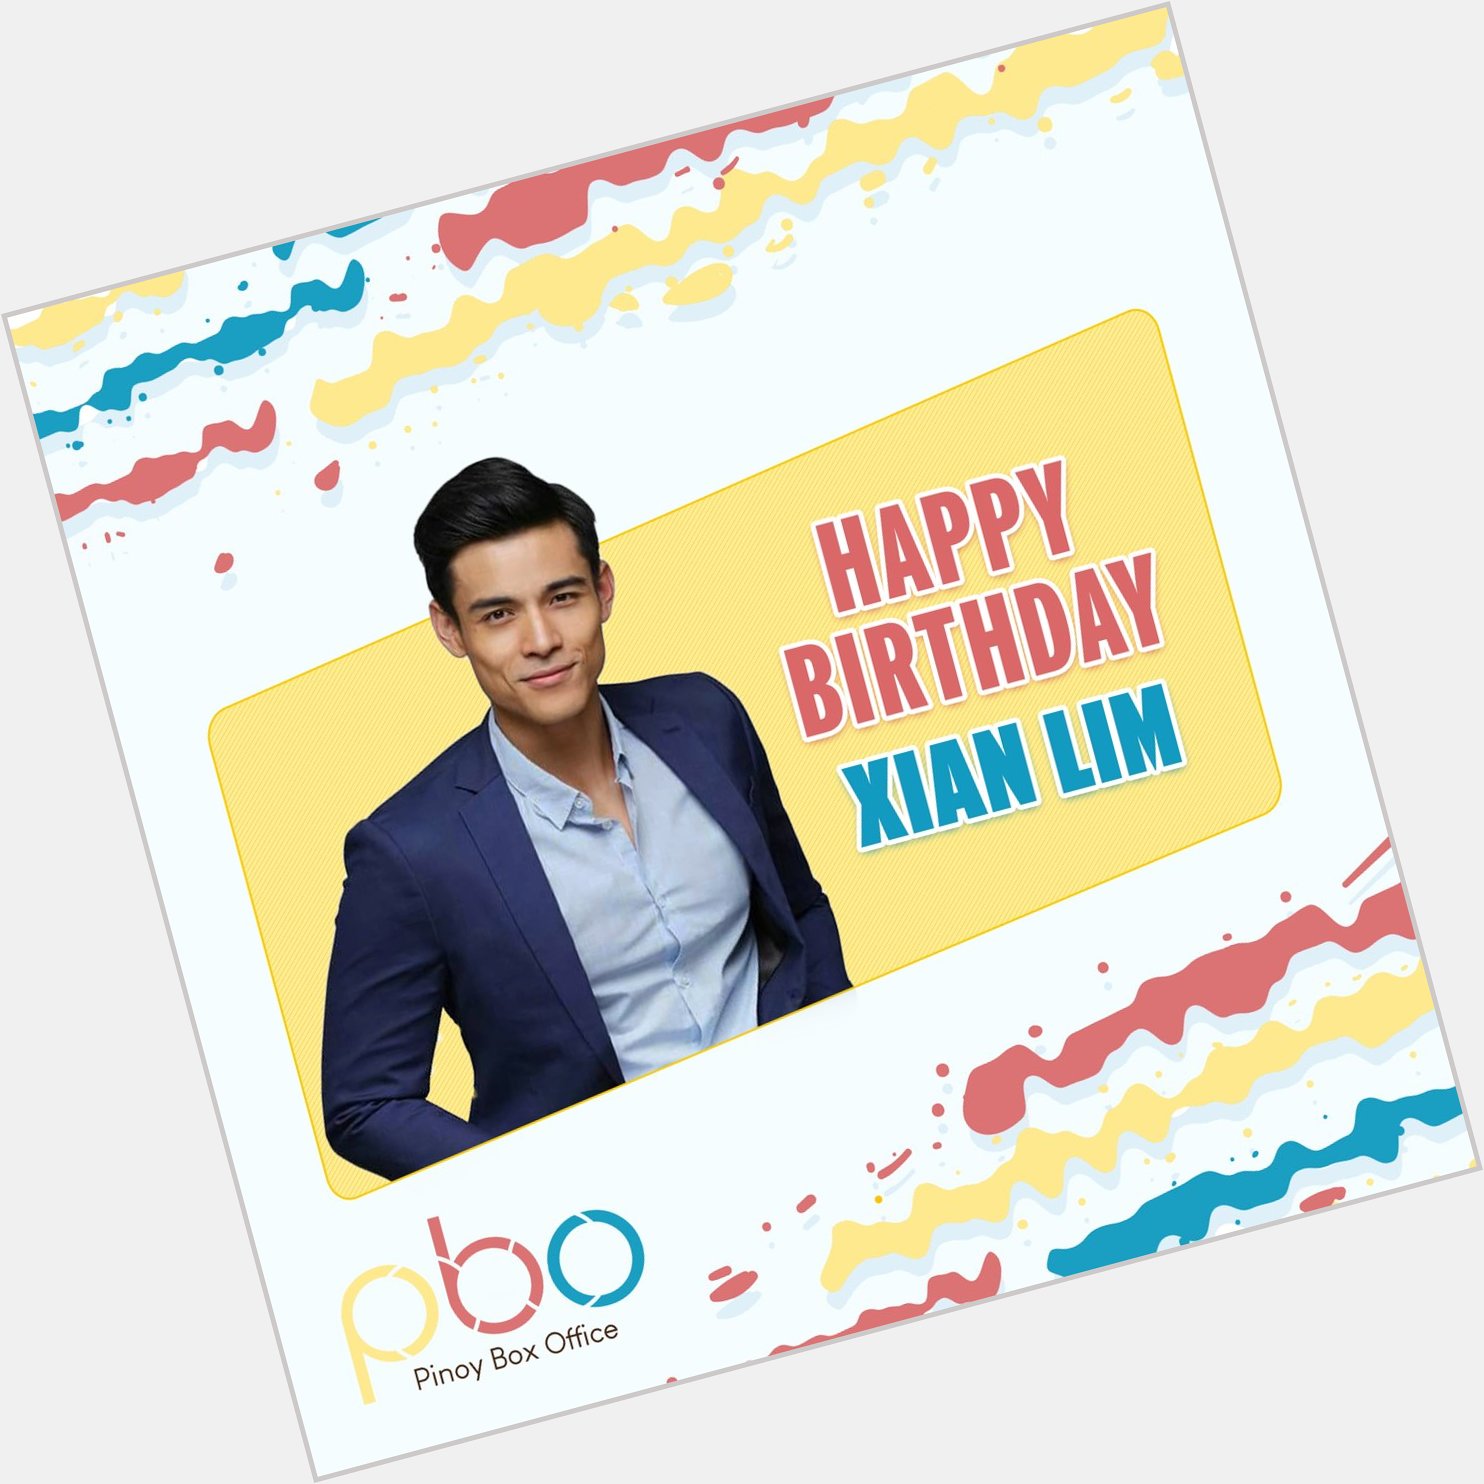 Happy birthday, Xian Lim! May your special day be amazing, wonderful, and unforgettable as you are! 